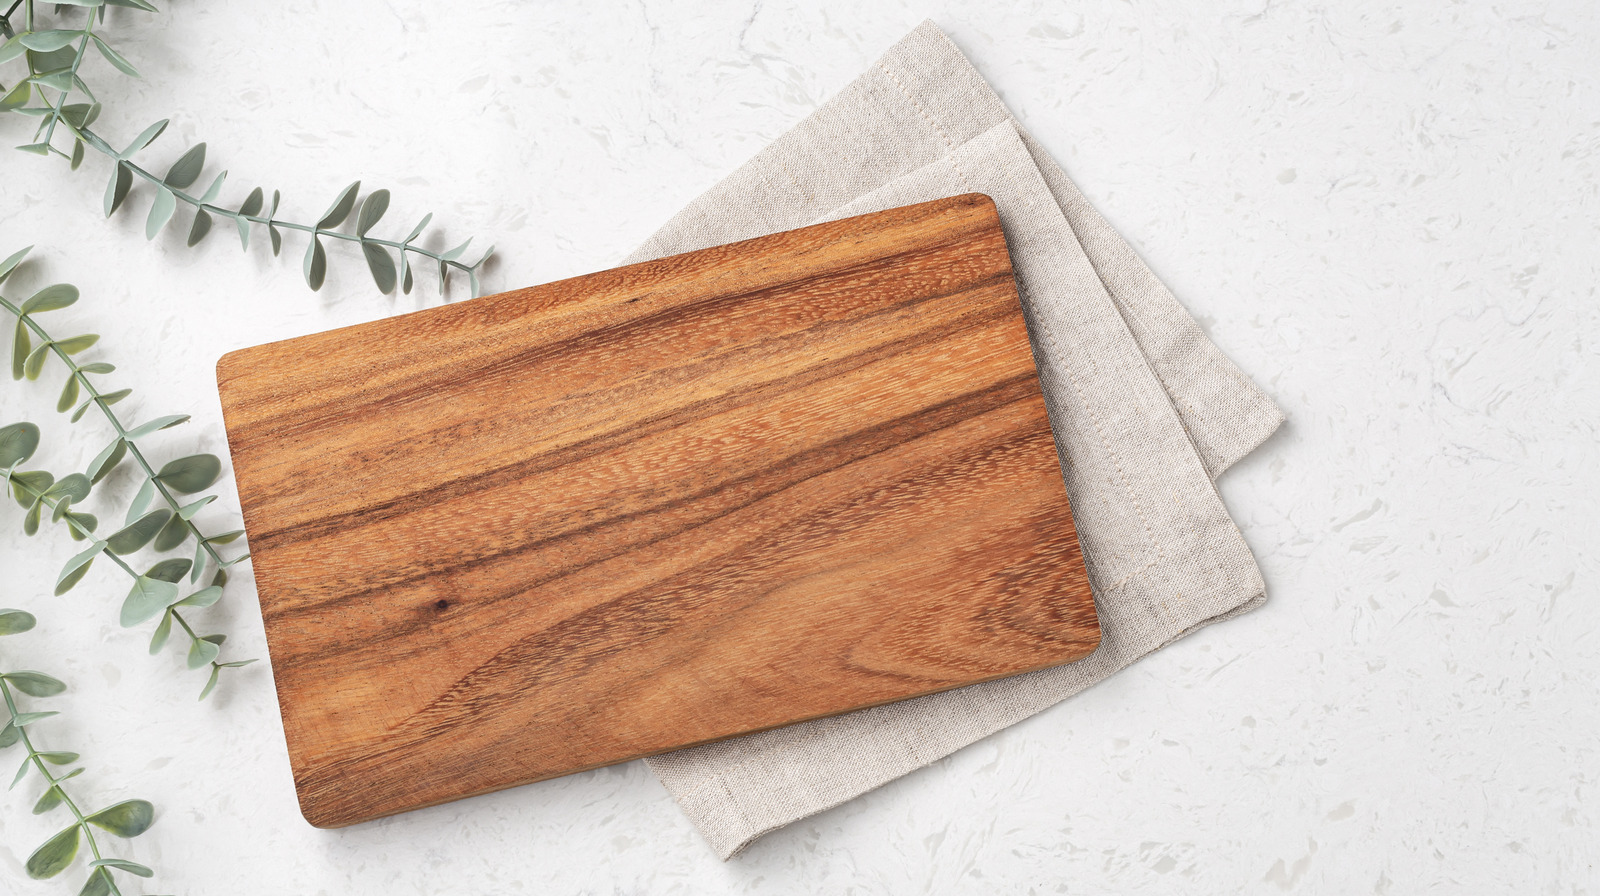 The Correct Way To Store Wooden Cutting Boards So They Last Way Longer